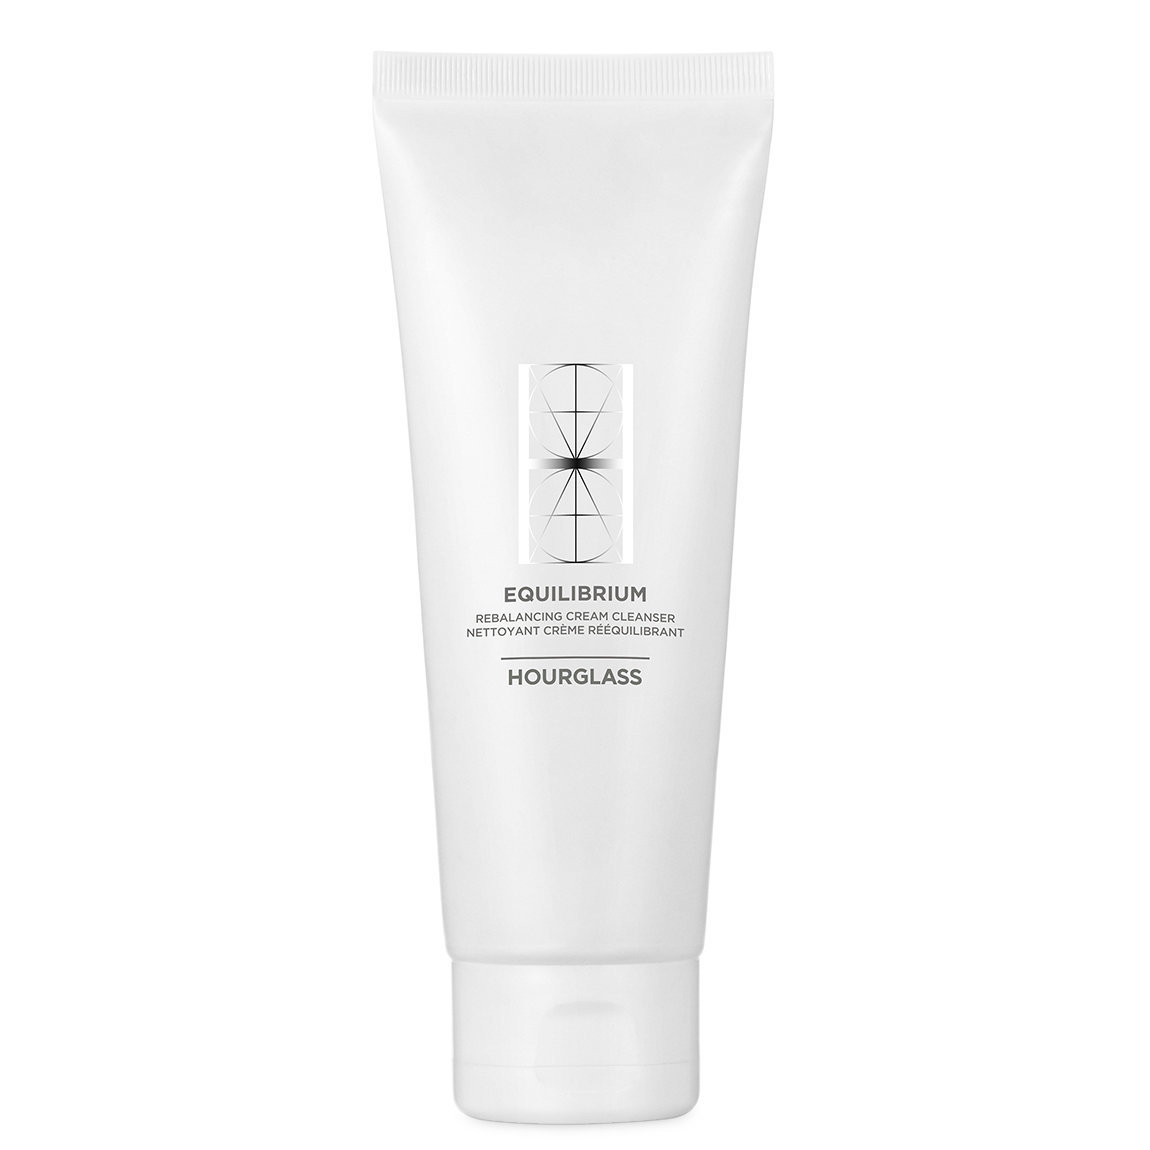 Hourglass Equilibrium Rebalancing Cream Cleanser 110 ml alternative view 1 - product swatch.